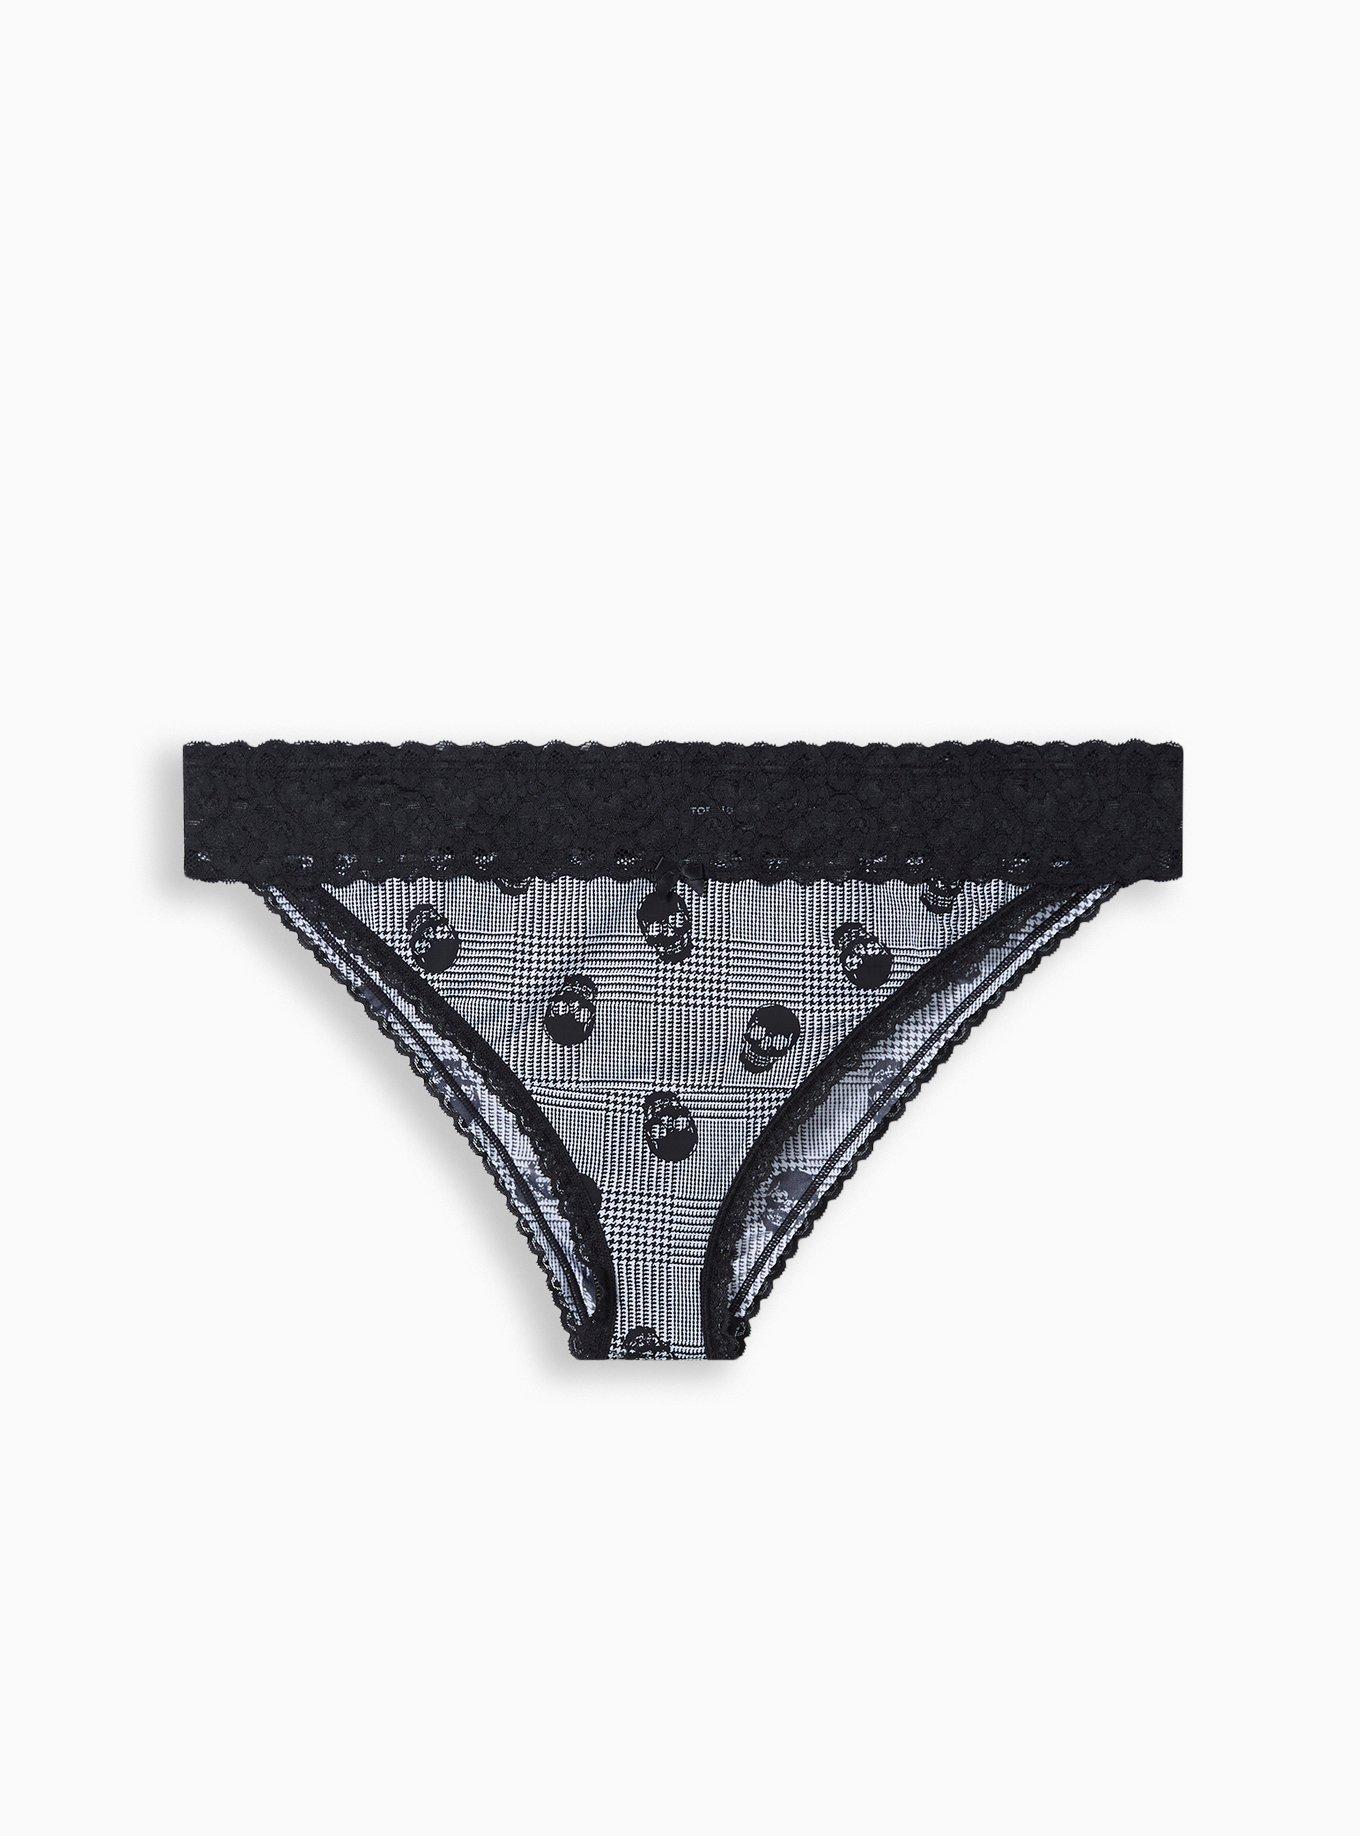 Mesh and Lace Trim Cheeky Panty - Butterfly